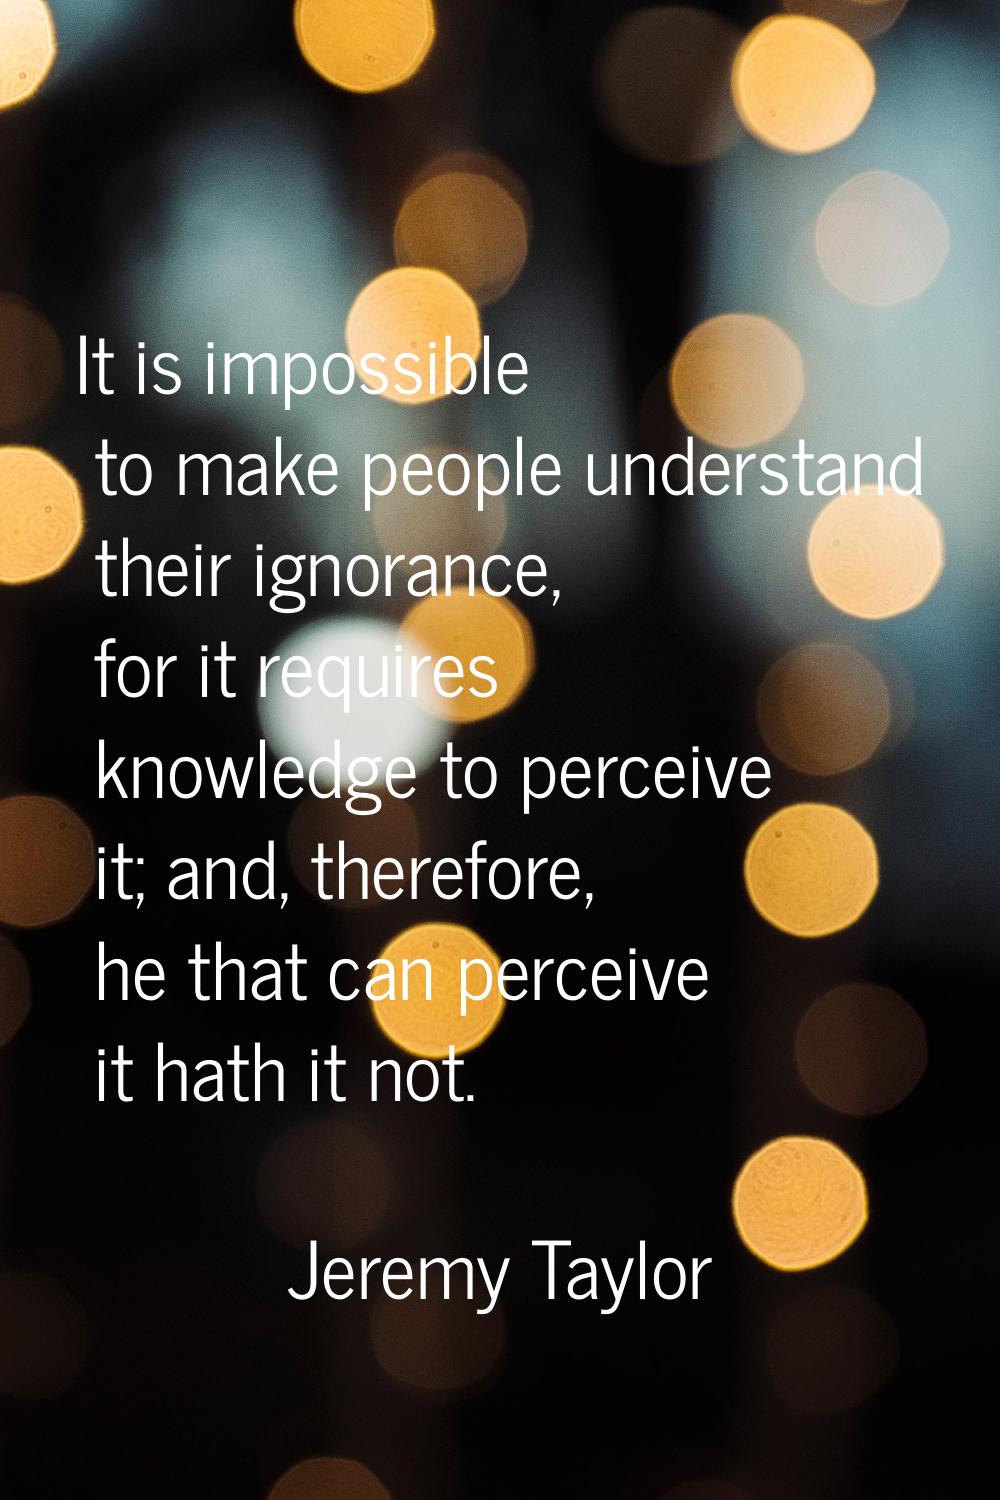 It is impossible to make people understand their ignorance, for it requires knowledge to perceive i